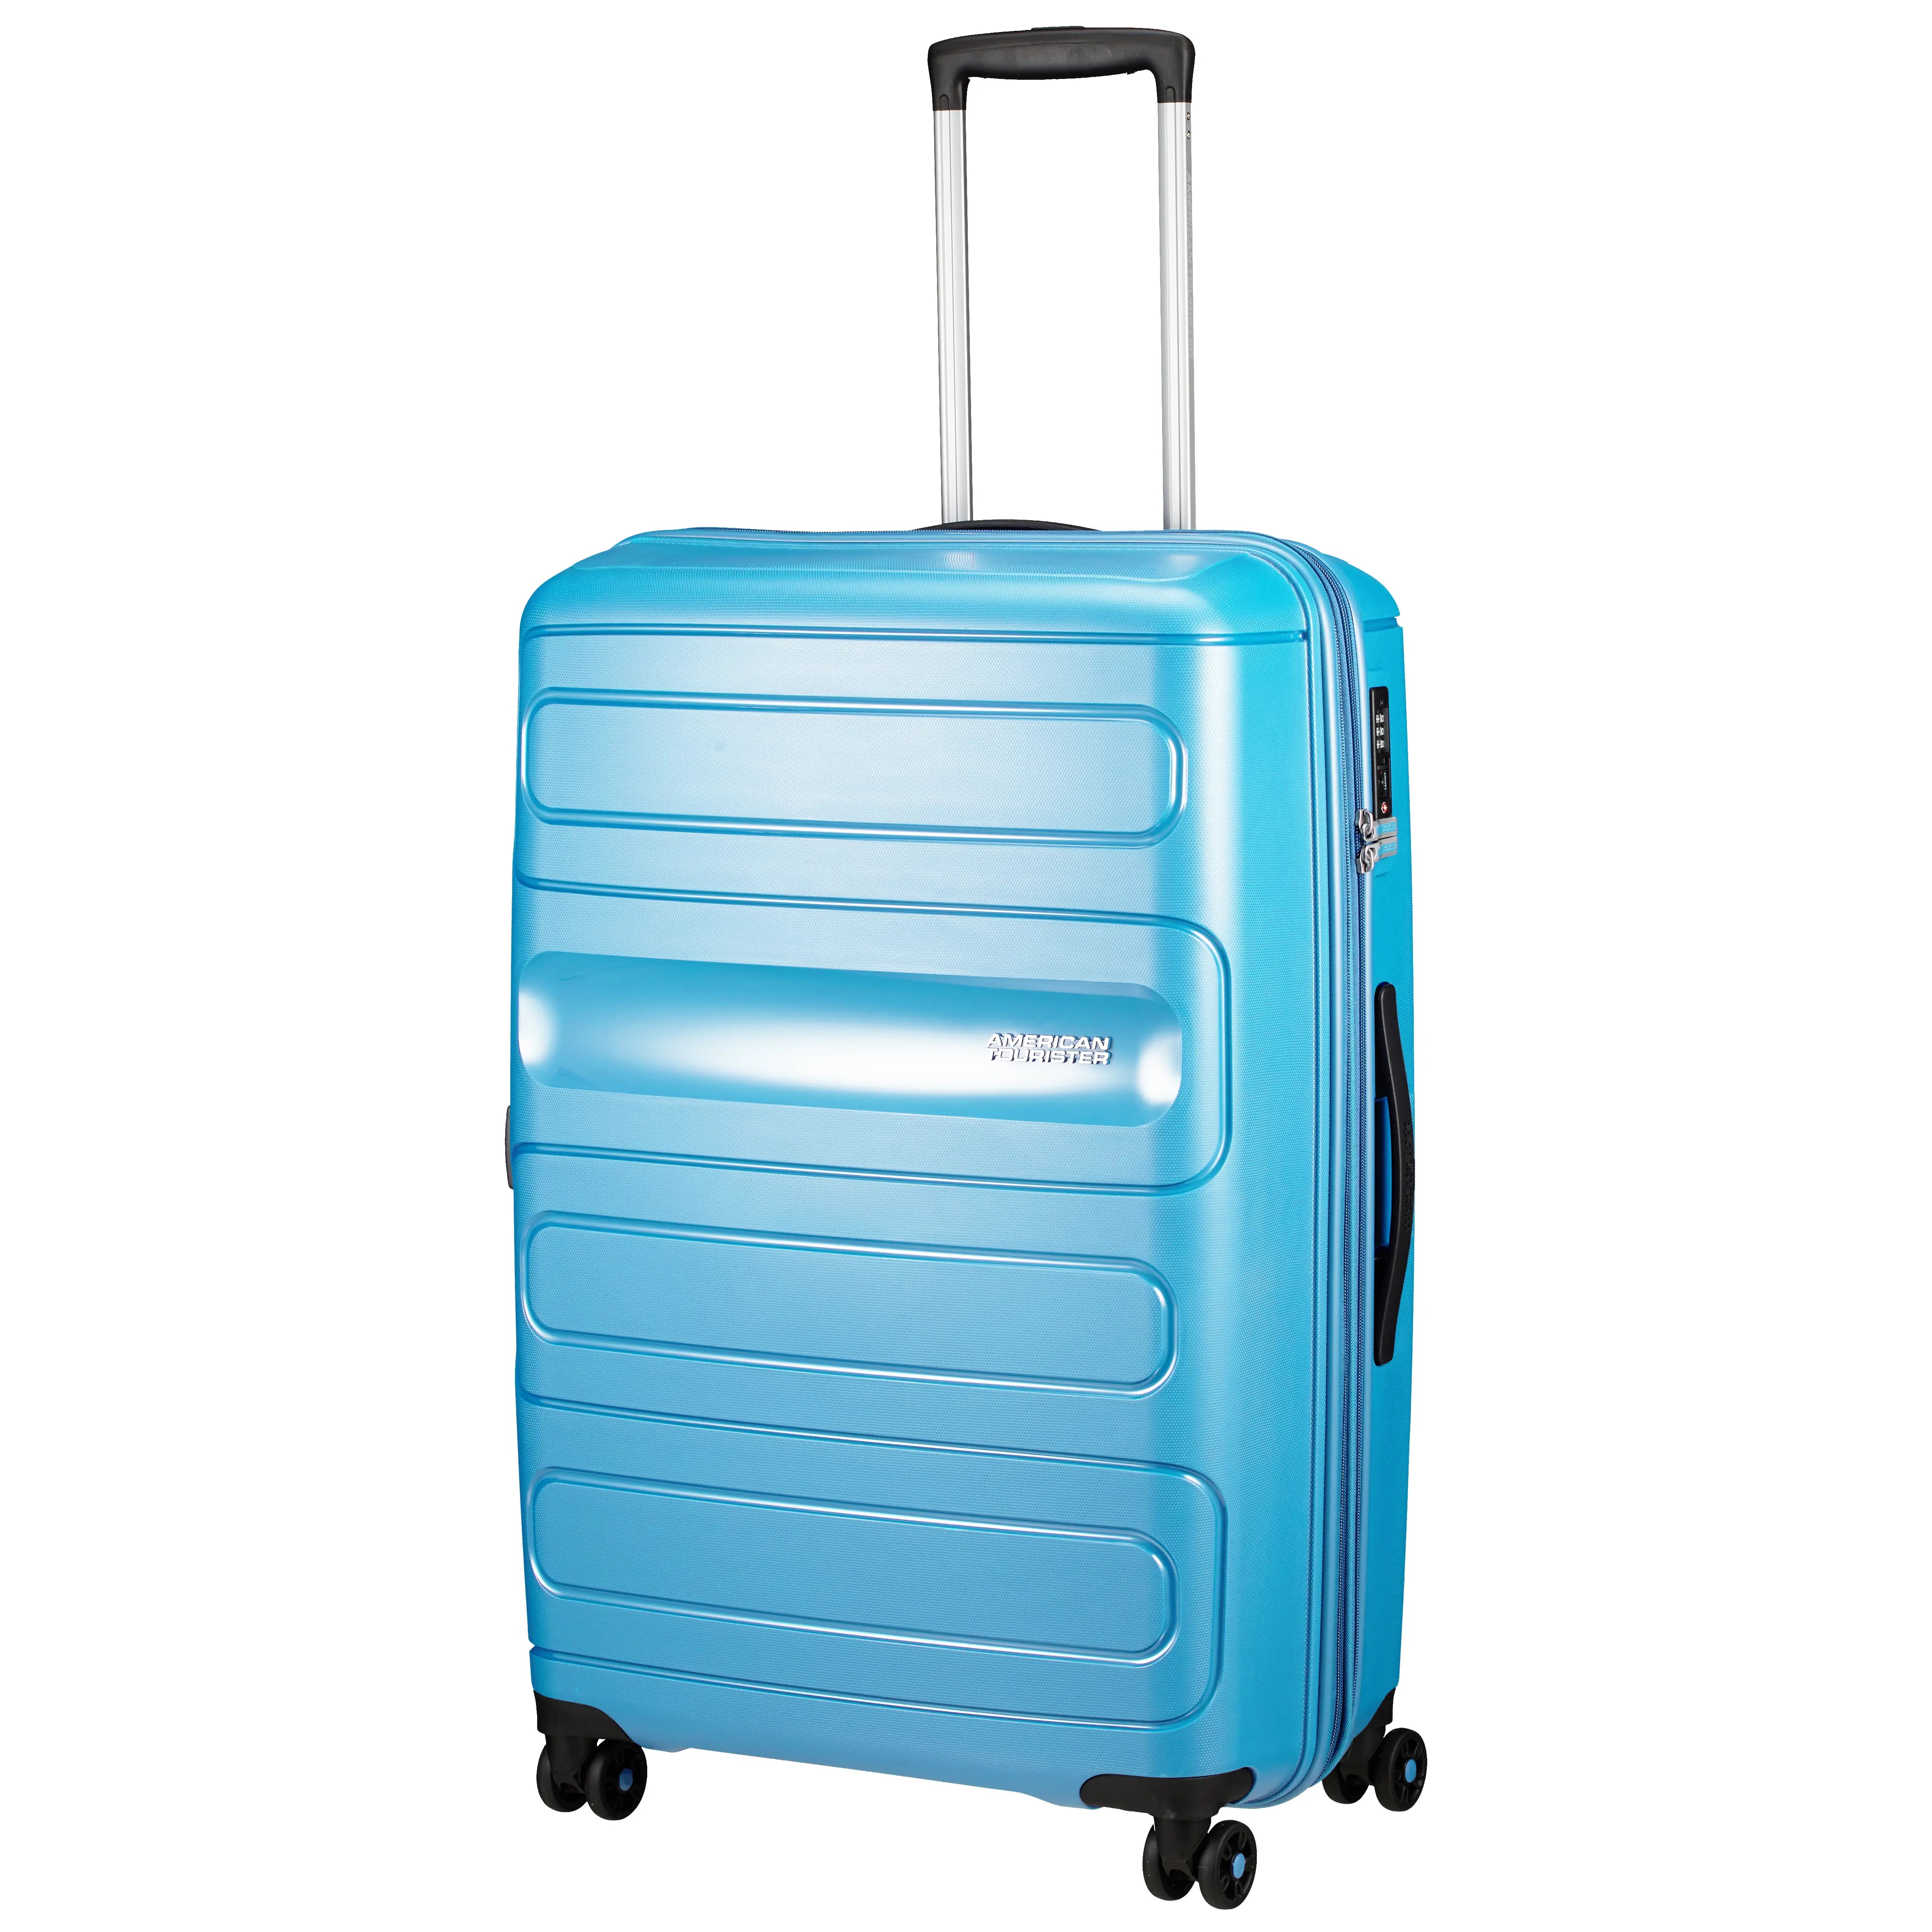 American Tourister Sunside 4-Rollen-Trolley 77 cm - Totally Teal